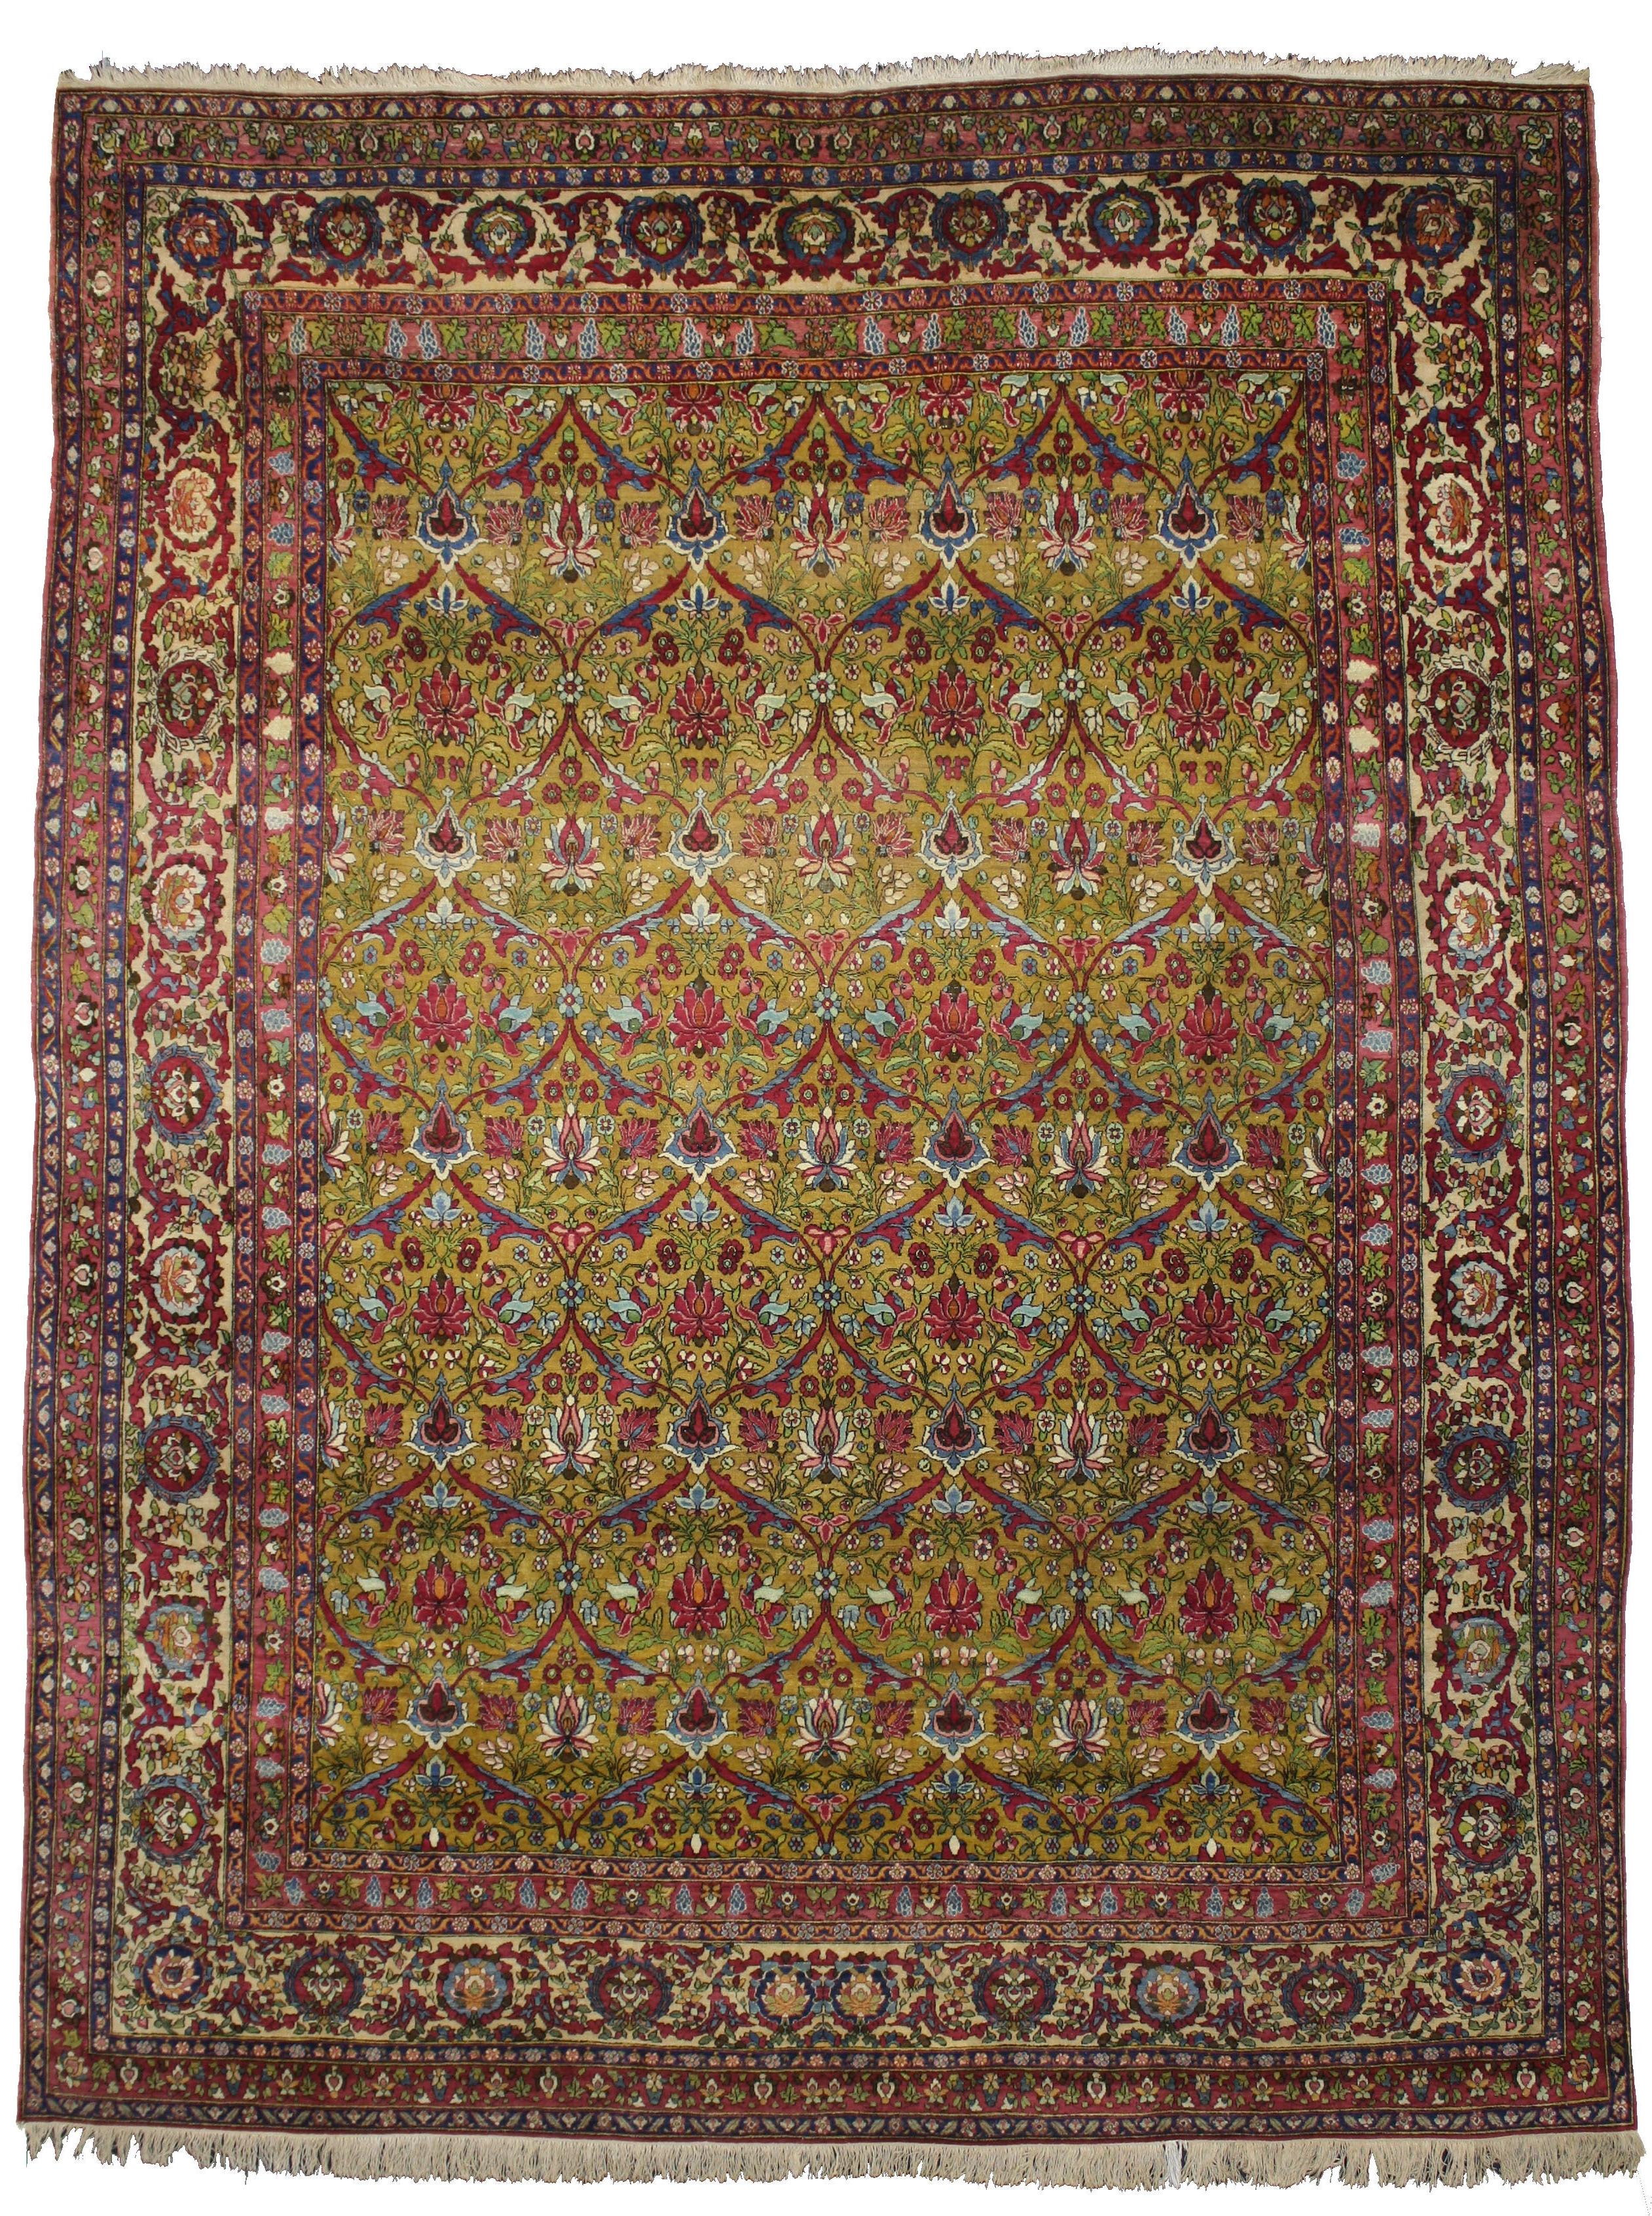 Antique Persian Isfahan Rug, Old World Charm Meets French Baroque Style For Sale